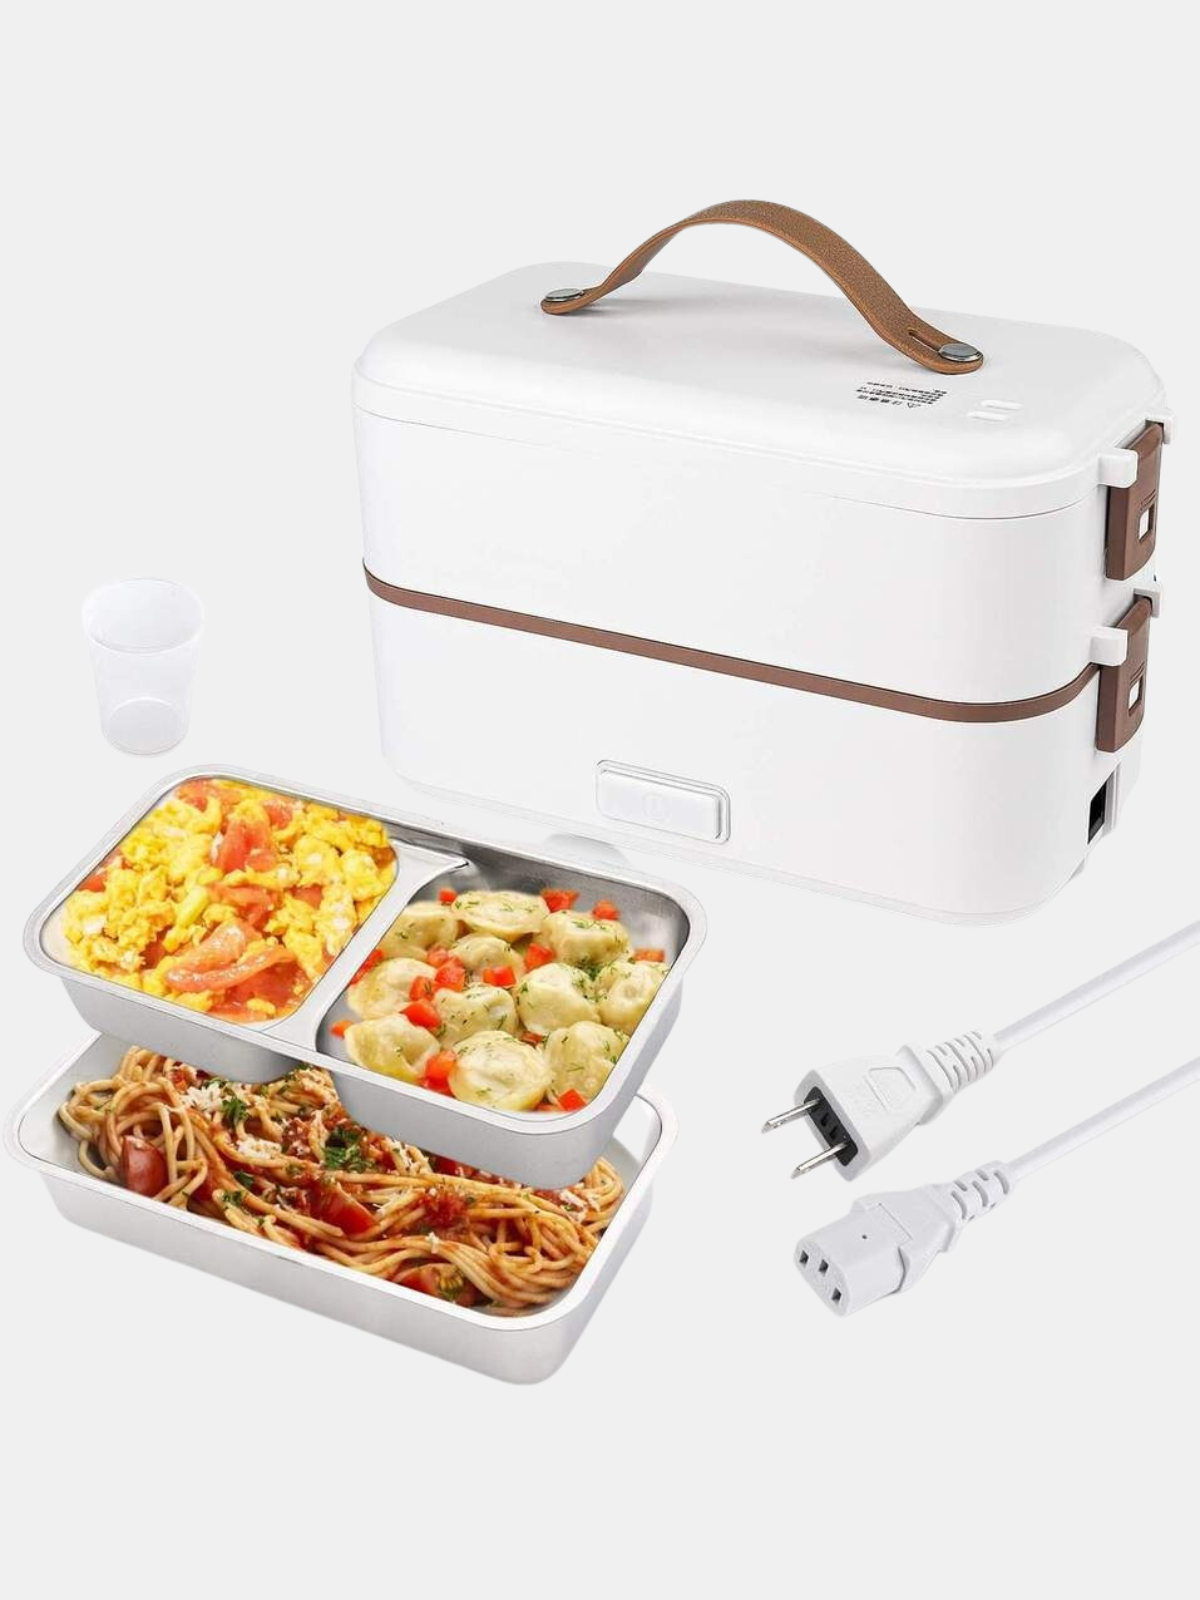 https://images.verishop.com/vigor-heated-lunch-box-800-ml-self-cooking-electric-lunch-box-portable-food-warmer-for-on-the-go-2-layers/M00749565871006-3142126257?auto=format&cs=strip&fit=max&w=1200